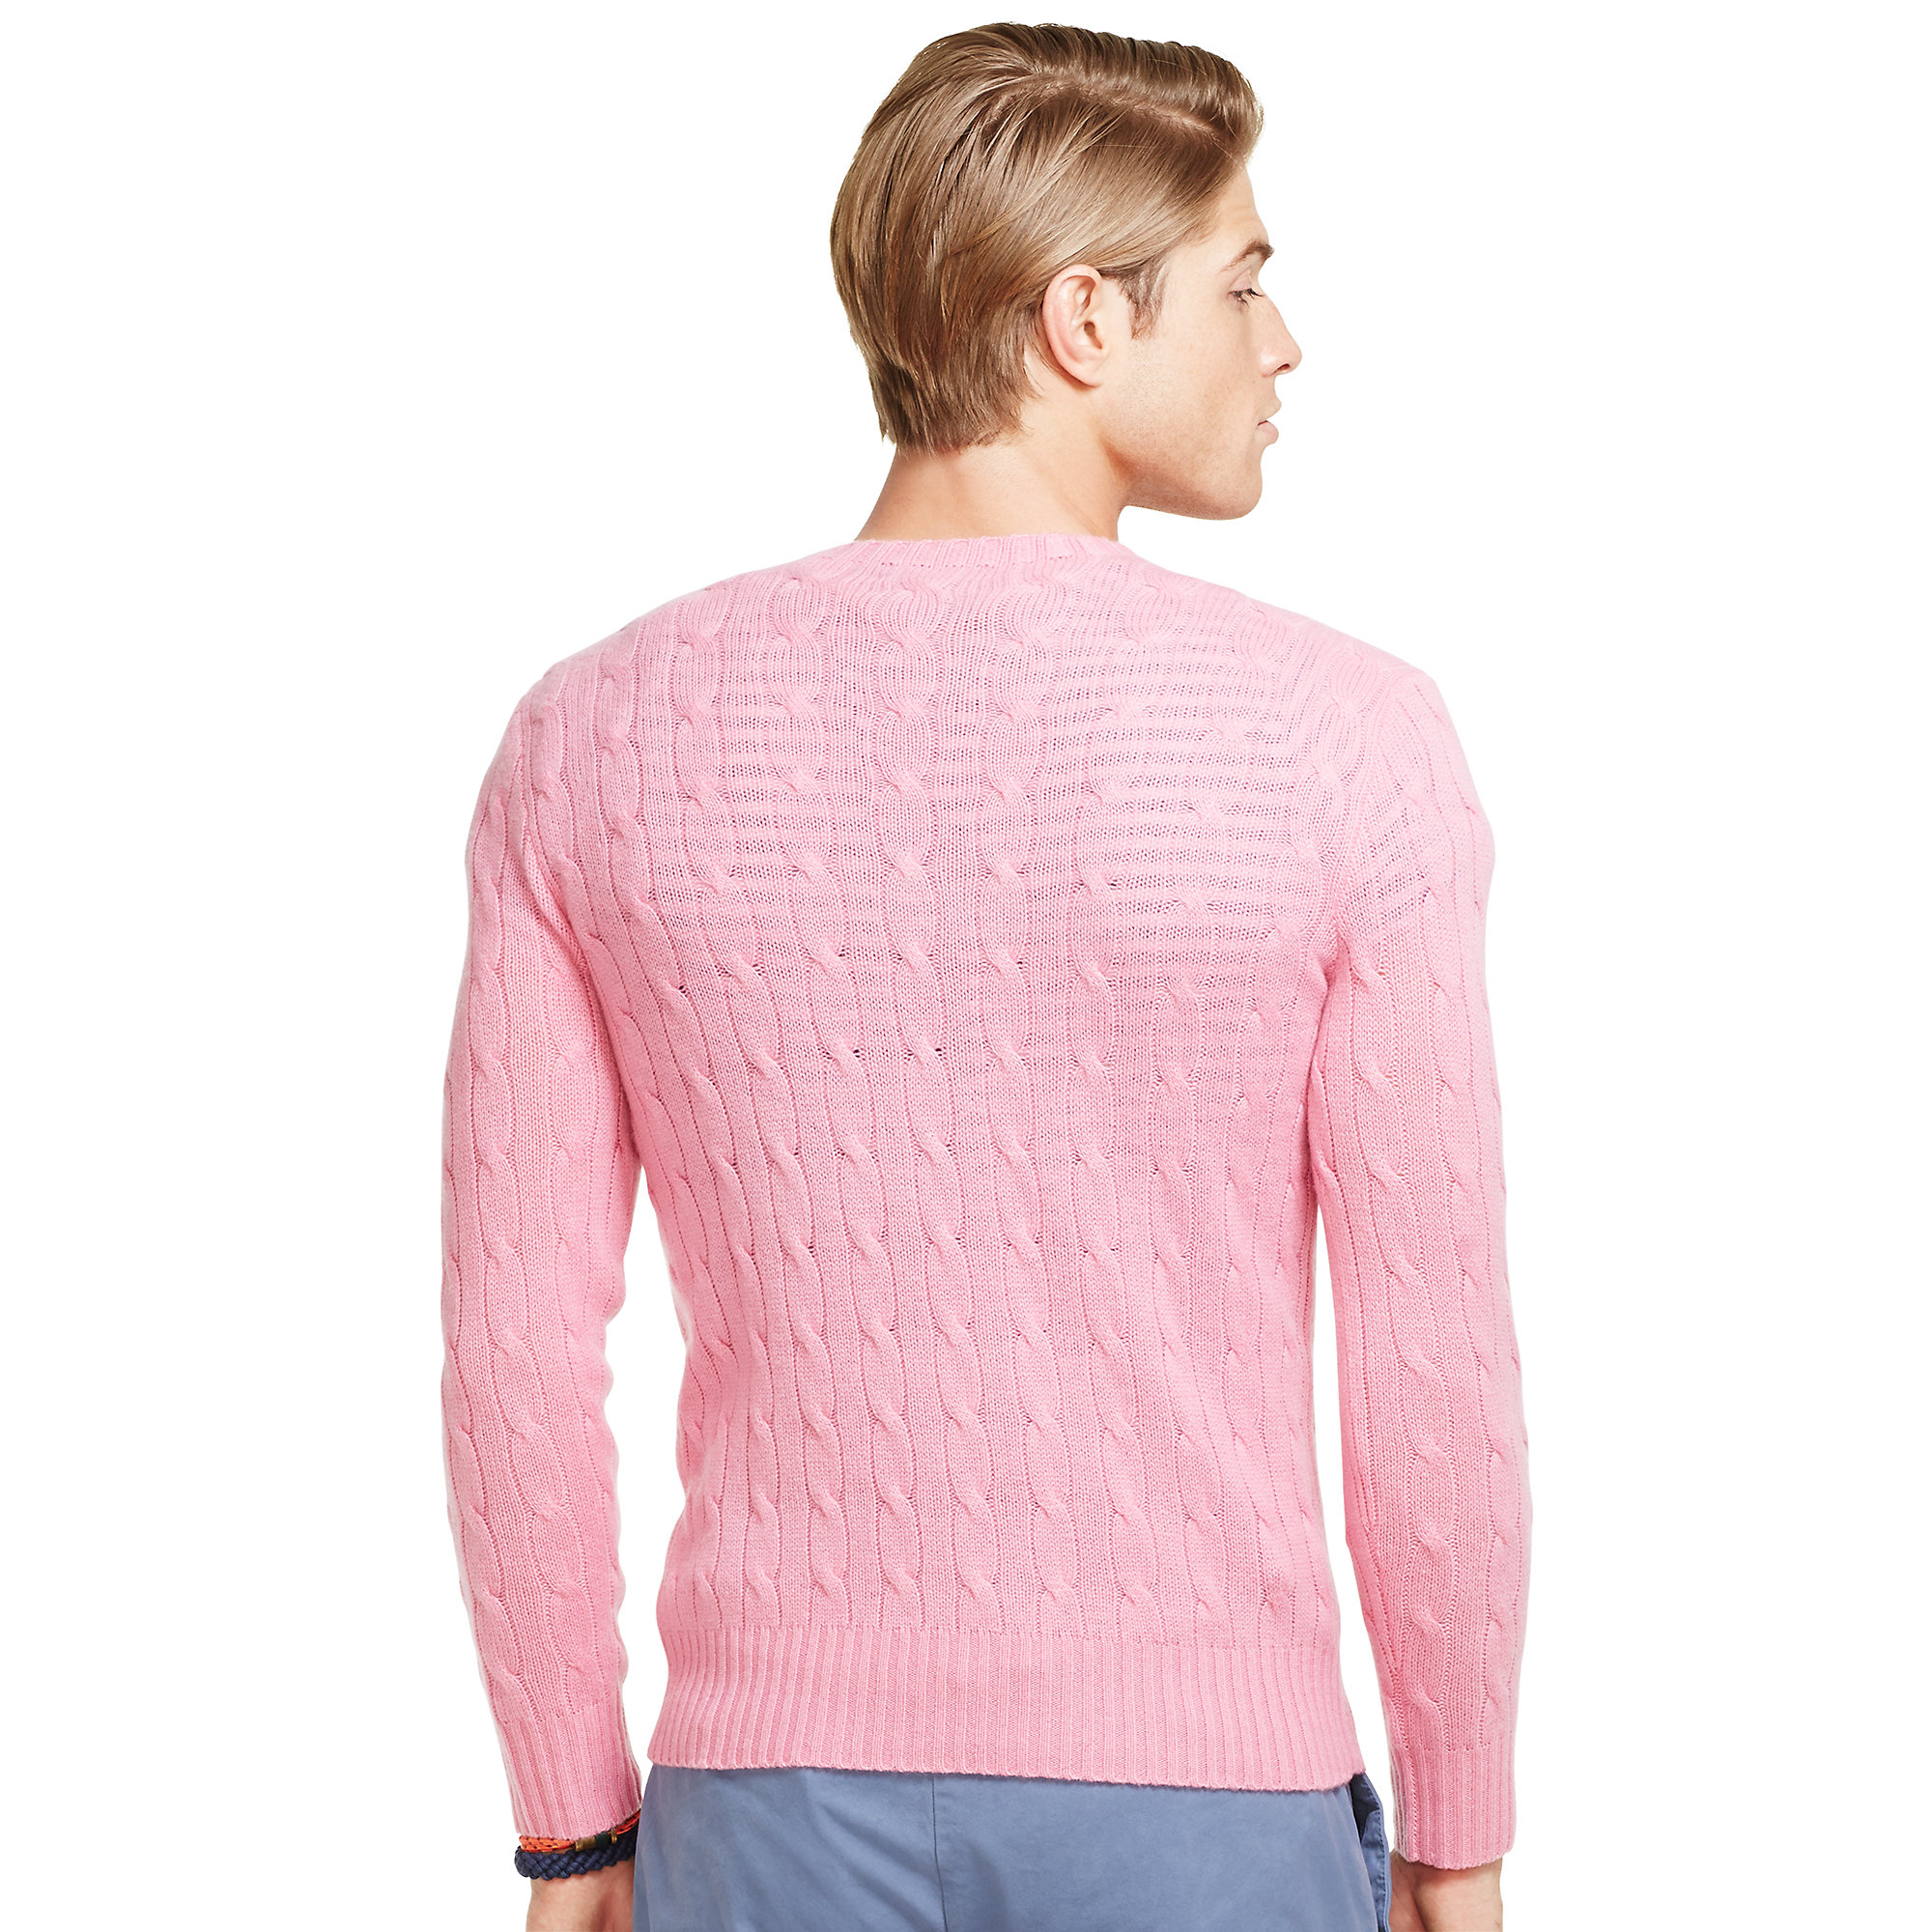 Polo Ralph Lauren Cable-Knit Cashmere Sweater in Pink for Men - Lyst